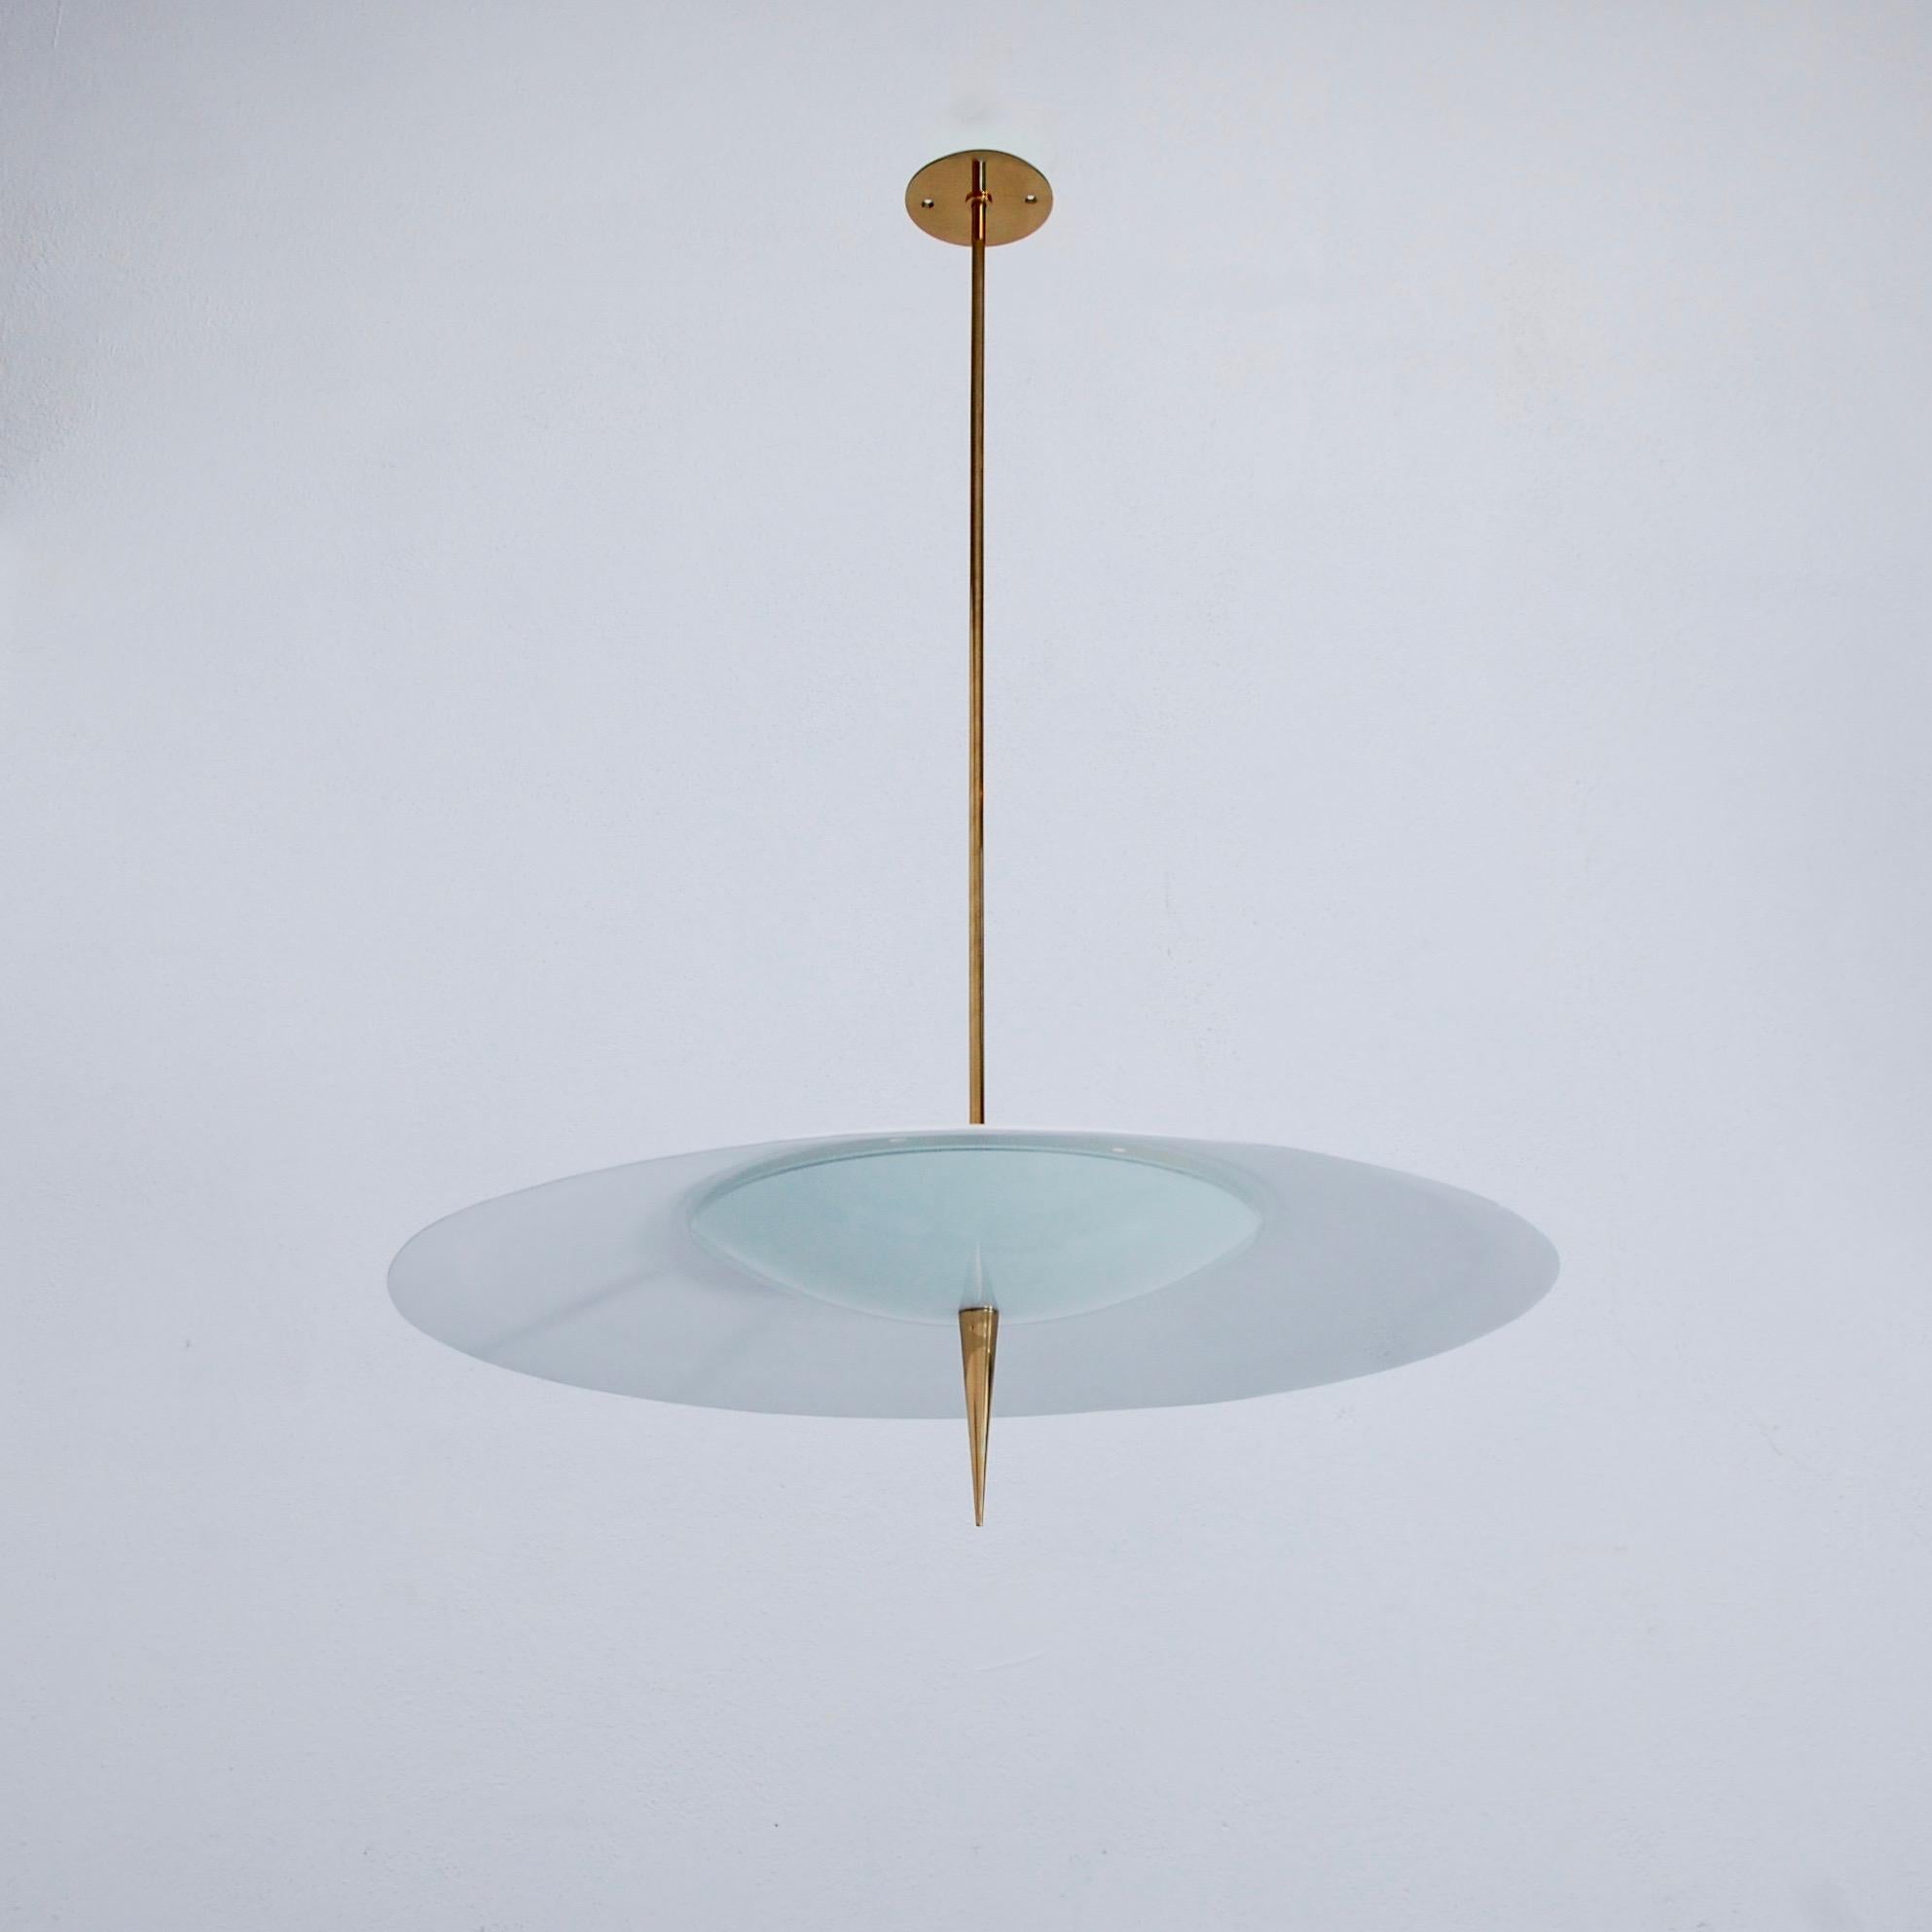 Elegant circular saucer pendant from 1960s Italy in glass, brass and painted aluminum. Partially restored. Wired for the US with a three E12 candelabra based sockets. Light bulbs included. Overall drop adjustable upon request.
Measurements:
OAD